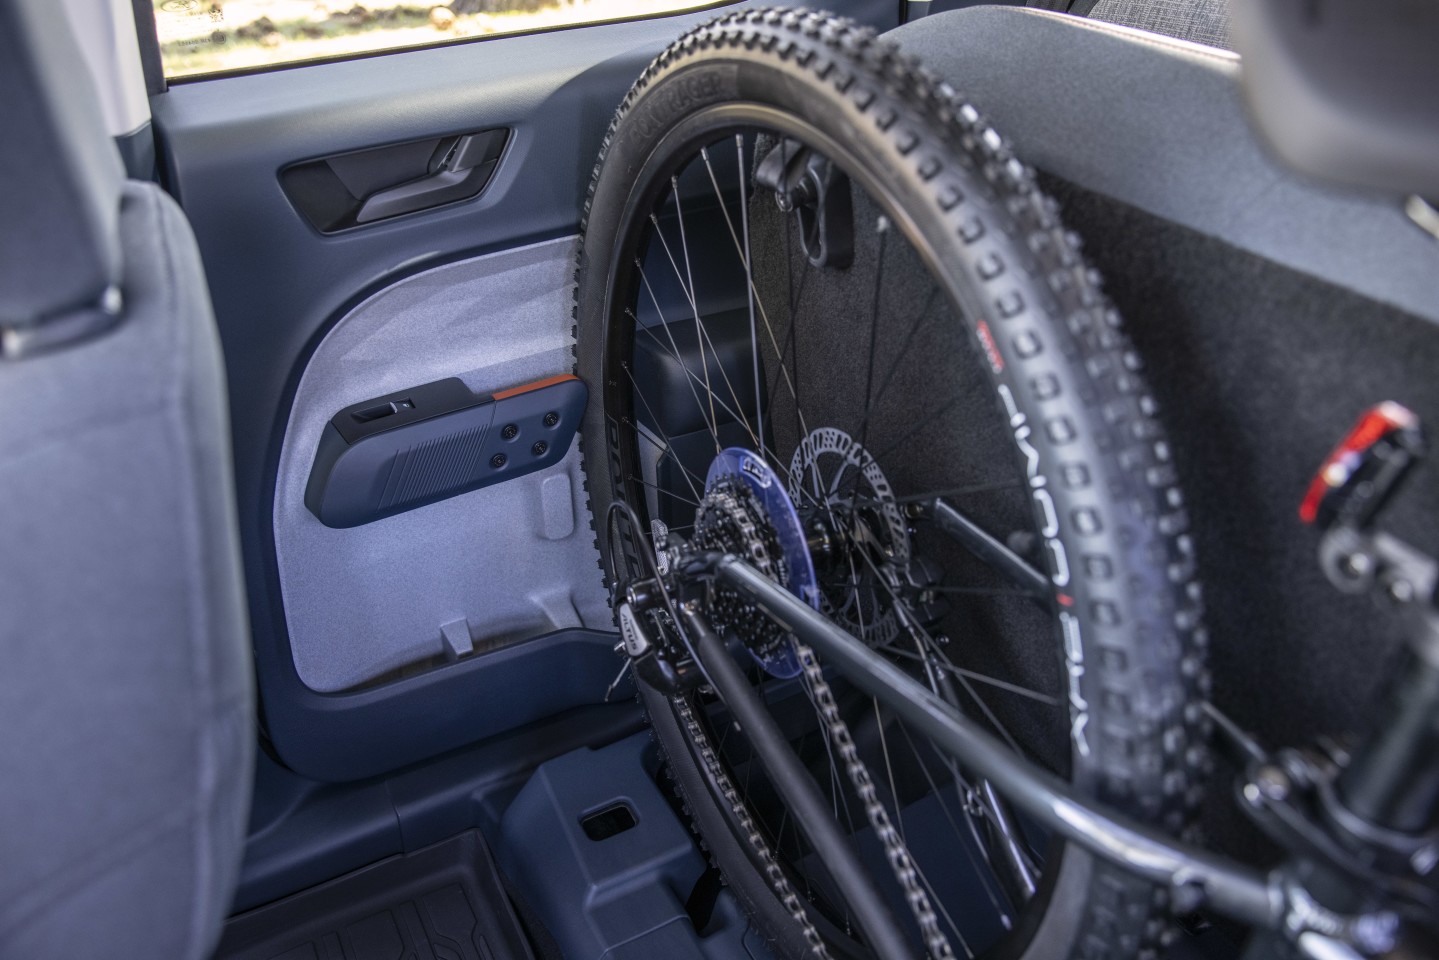 Slots in the rear door handles allow a bicycle tire to slide between, extending the rear cabin's width enough to accommodate most mountain bikes